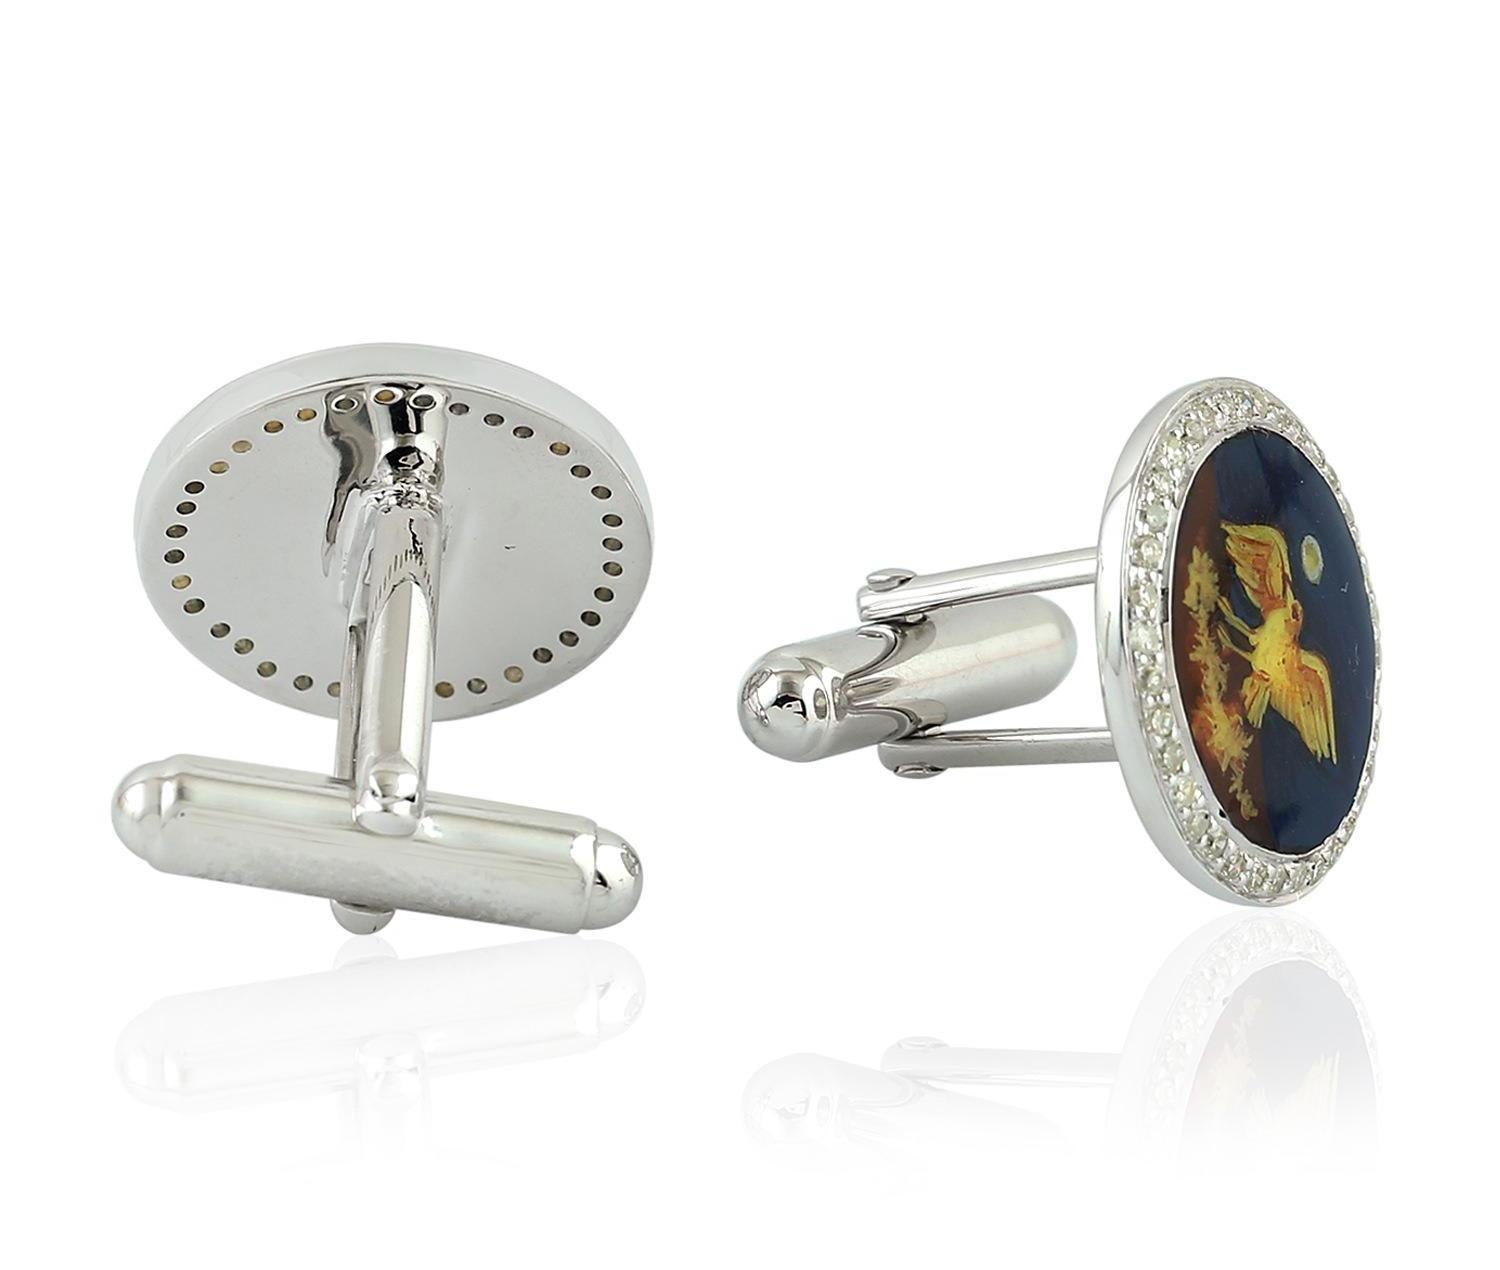 Cast from sterling silver, these enamel cuff links are hand set with .61 carats of pave diamonds with hand painted miniature art of Nightingale bird.

FOLLOW  MEGHNA JEWELS storefront to view the latest collection & exclusive pieces.  Meghna Jewels